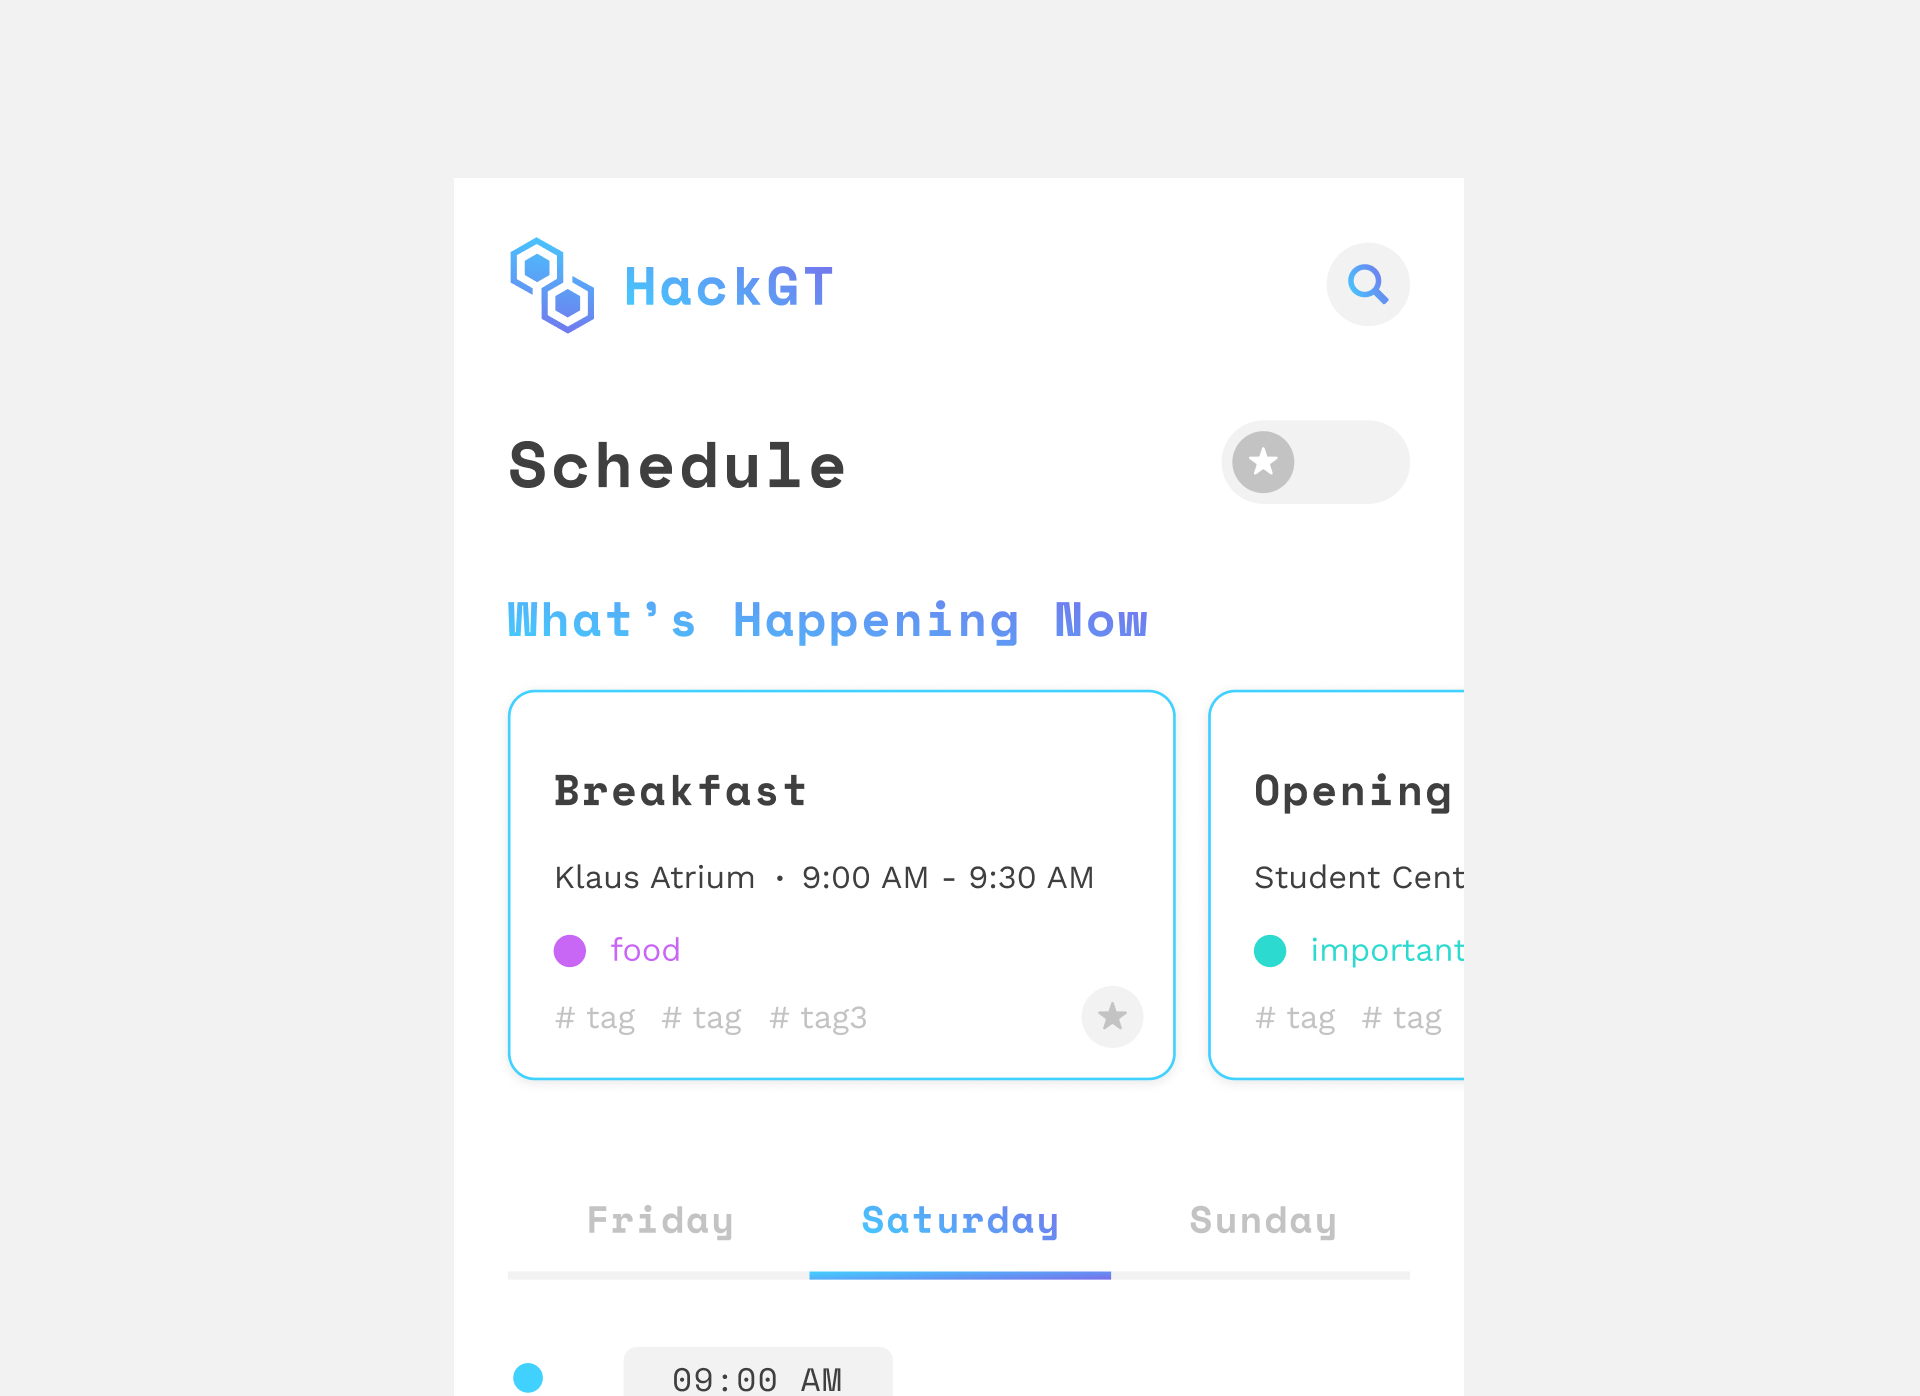 Hero shot of the HackGT scheduling app. Shows the schedule screen, with events that are currently happening now.